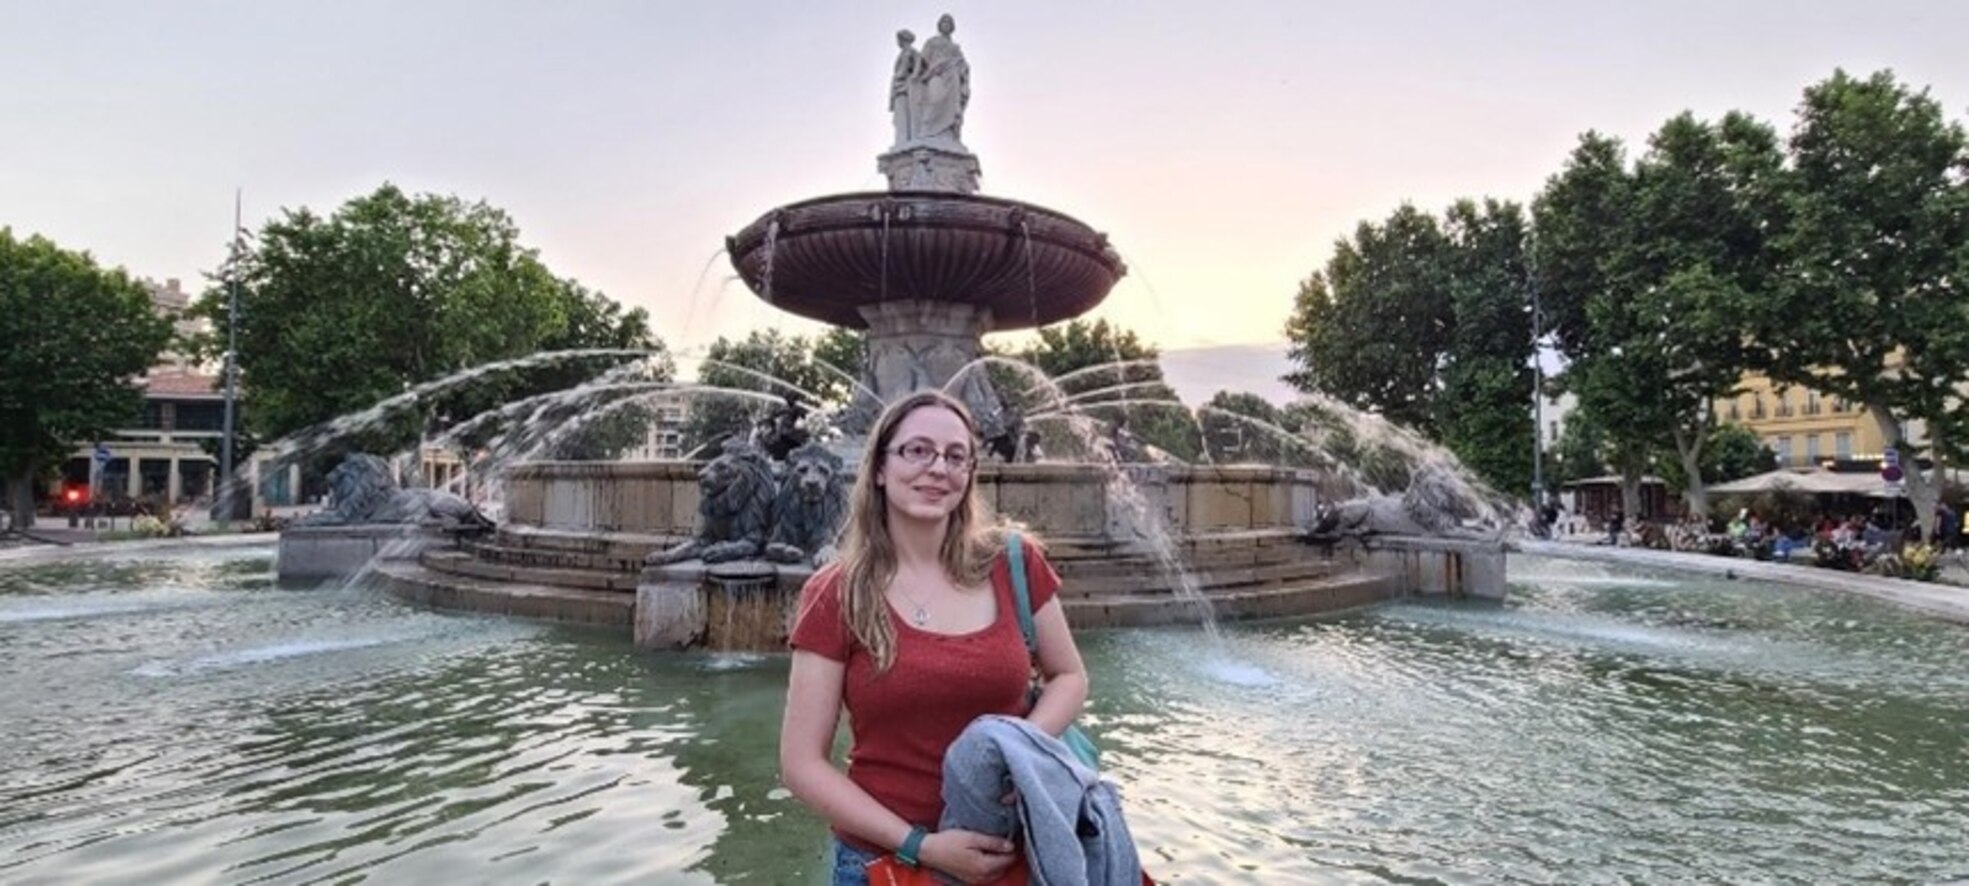 Woman standing in front of a fountain